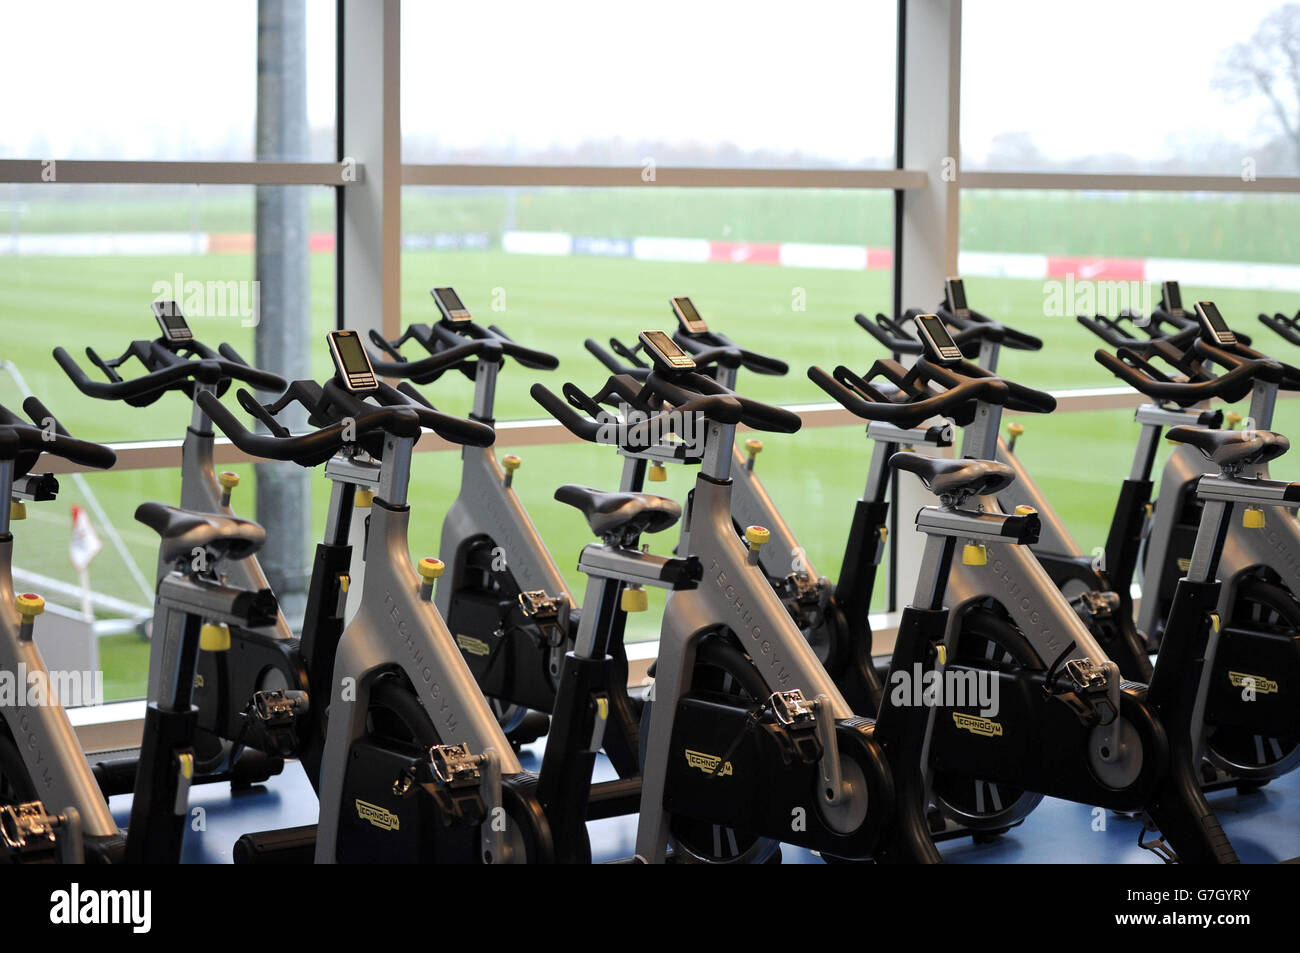 A general view of running machines in the gym used by the England football team to train, at St. George's Park, Burton-upon-Trent. Stock Photo